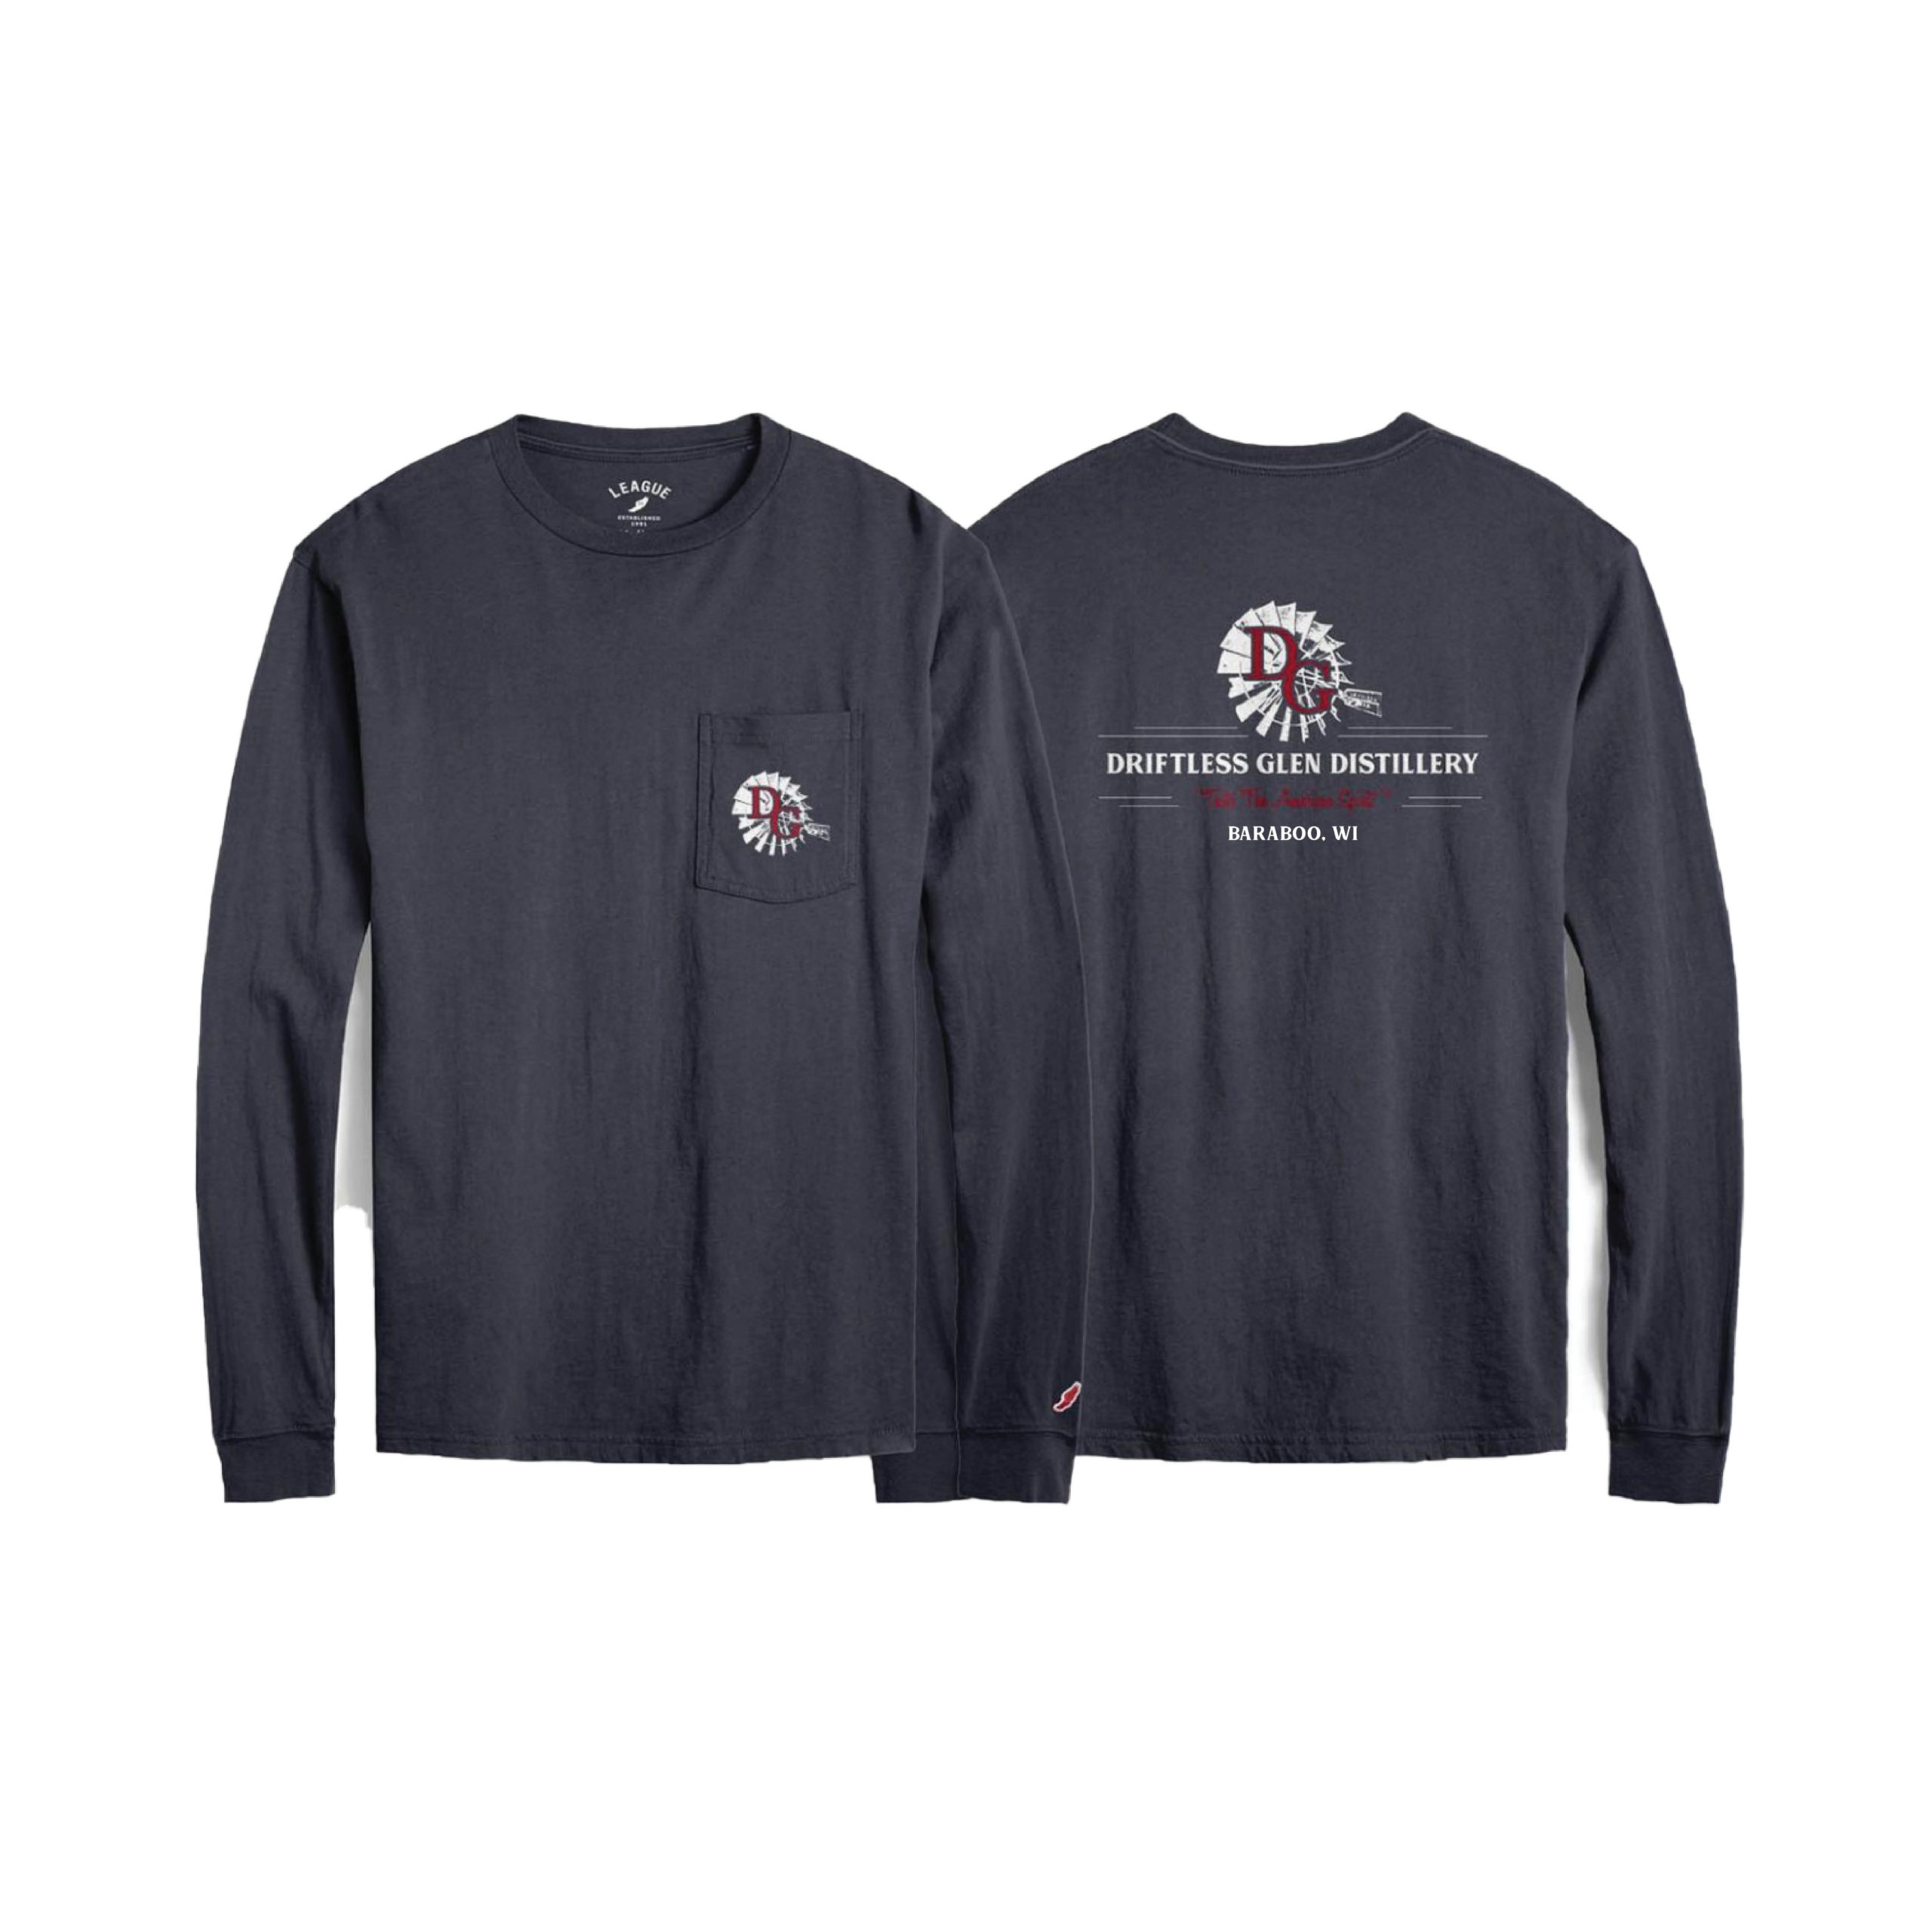 Long sleeve navy t-shirt with a pocket on the front and our logo large on the back